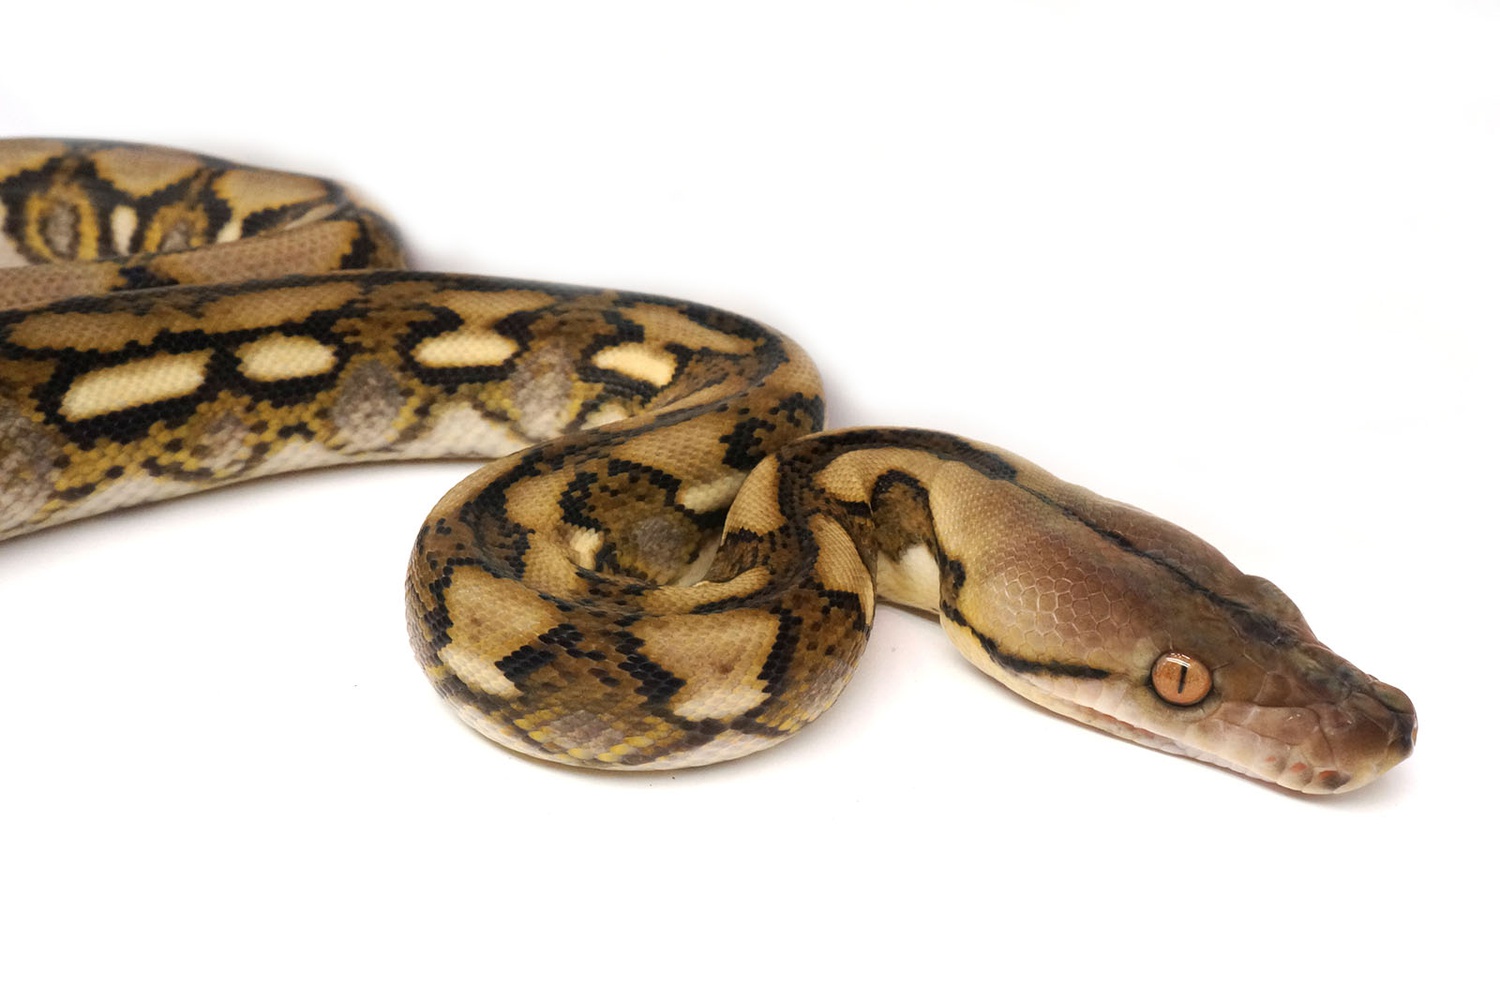 Tiger Reticulated Python by New England Reptile Distributors